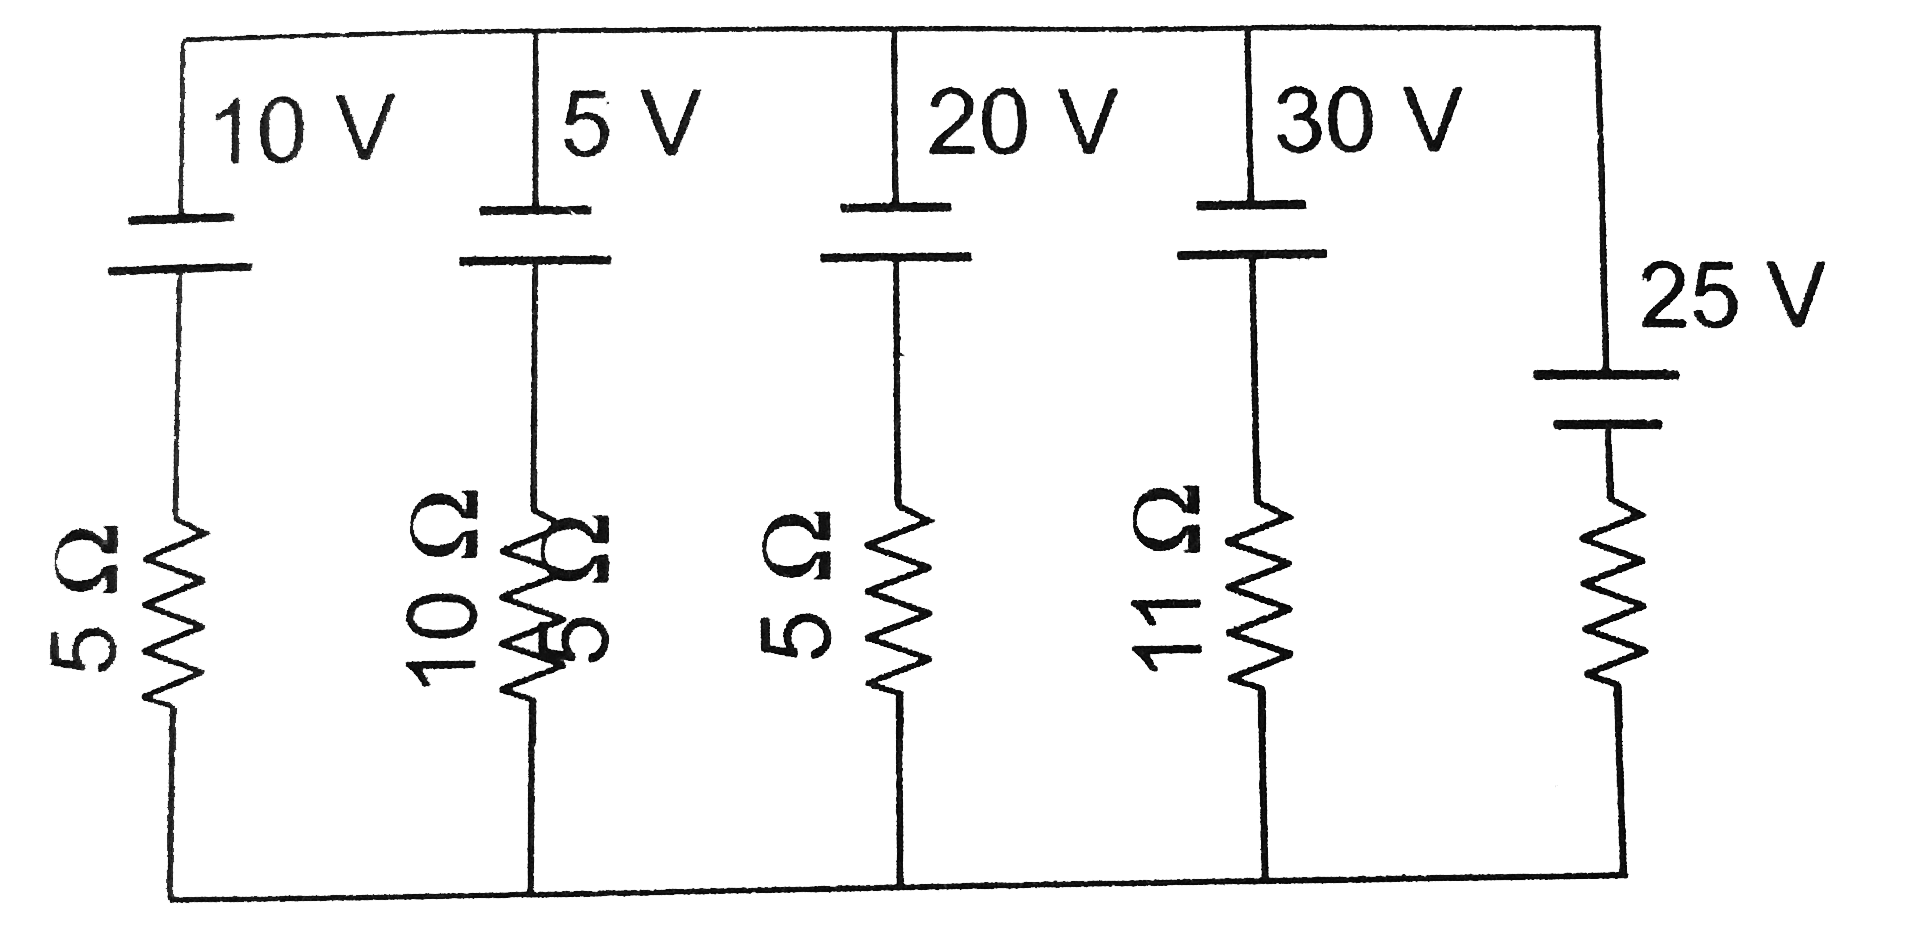 Find the power supplied by 20 V cell in the figure shown.